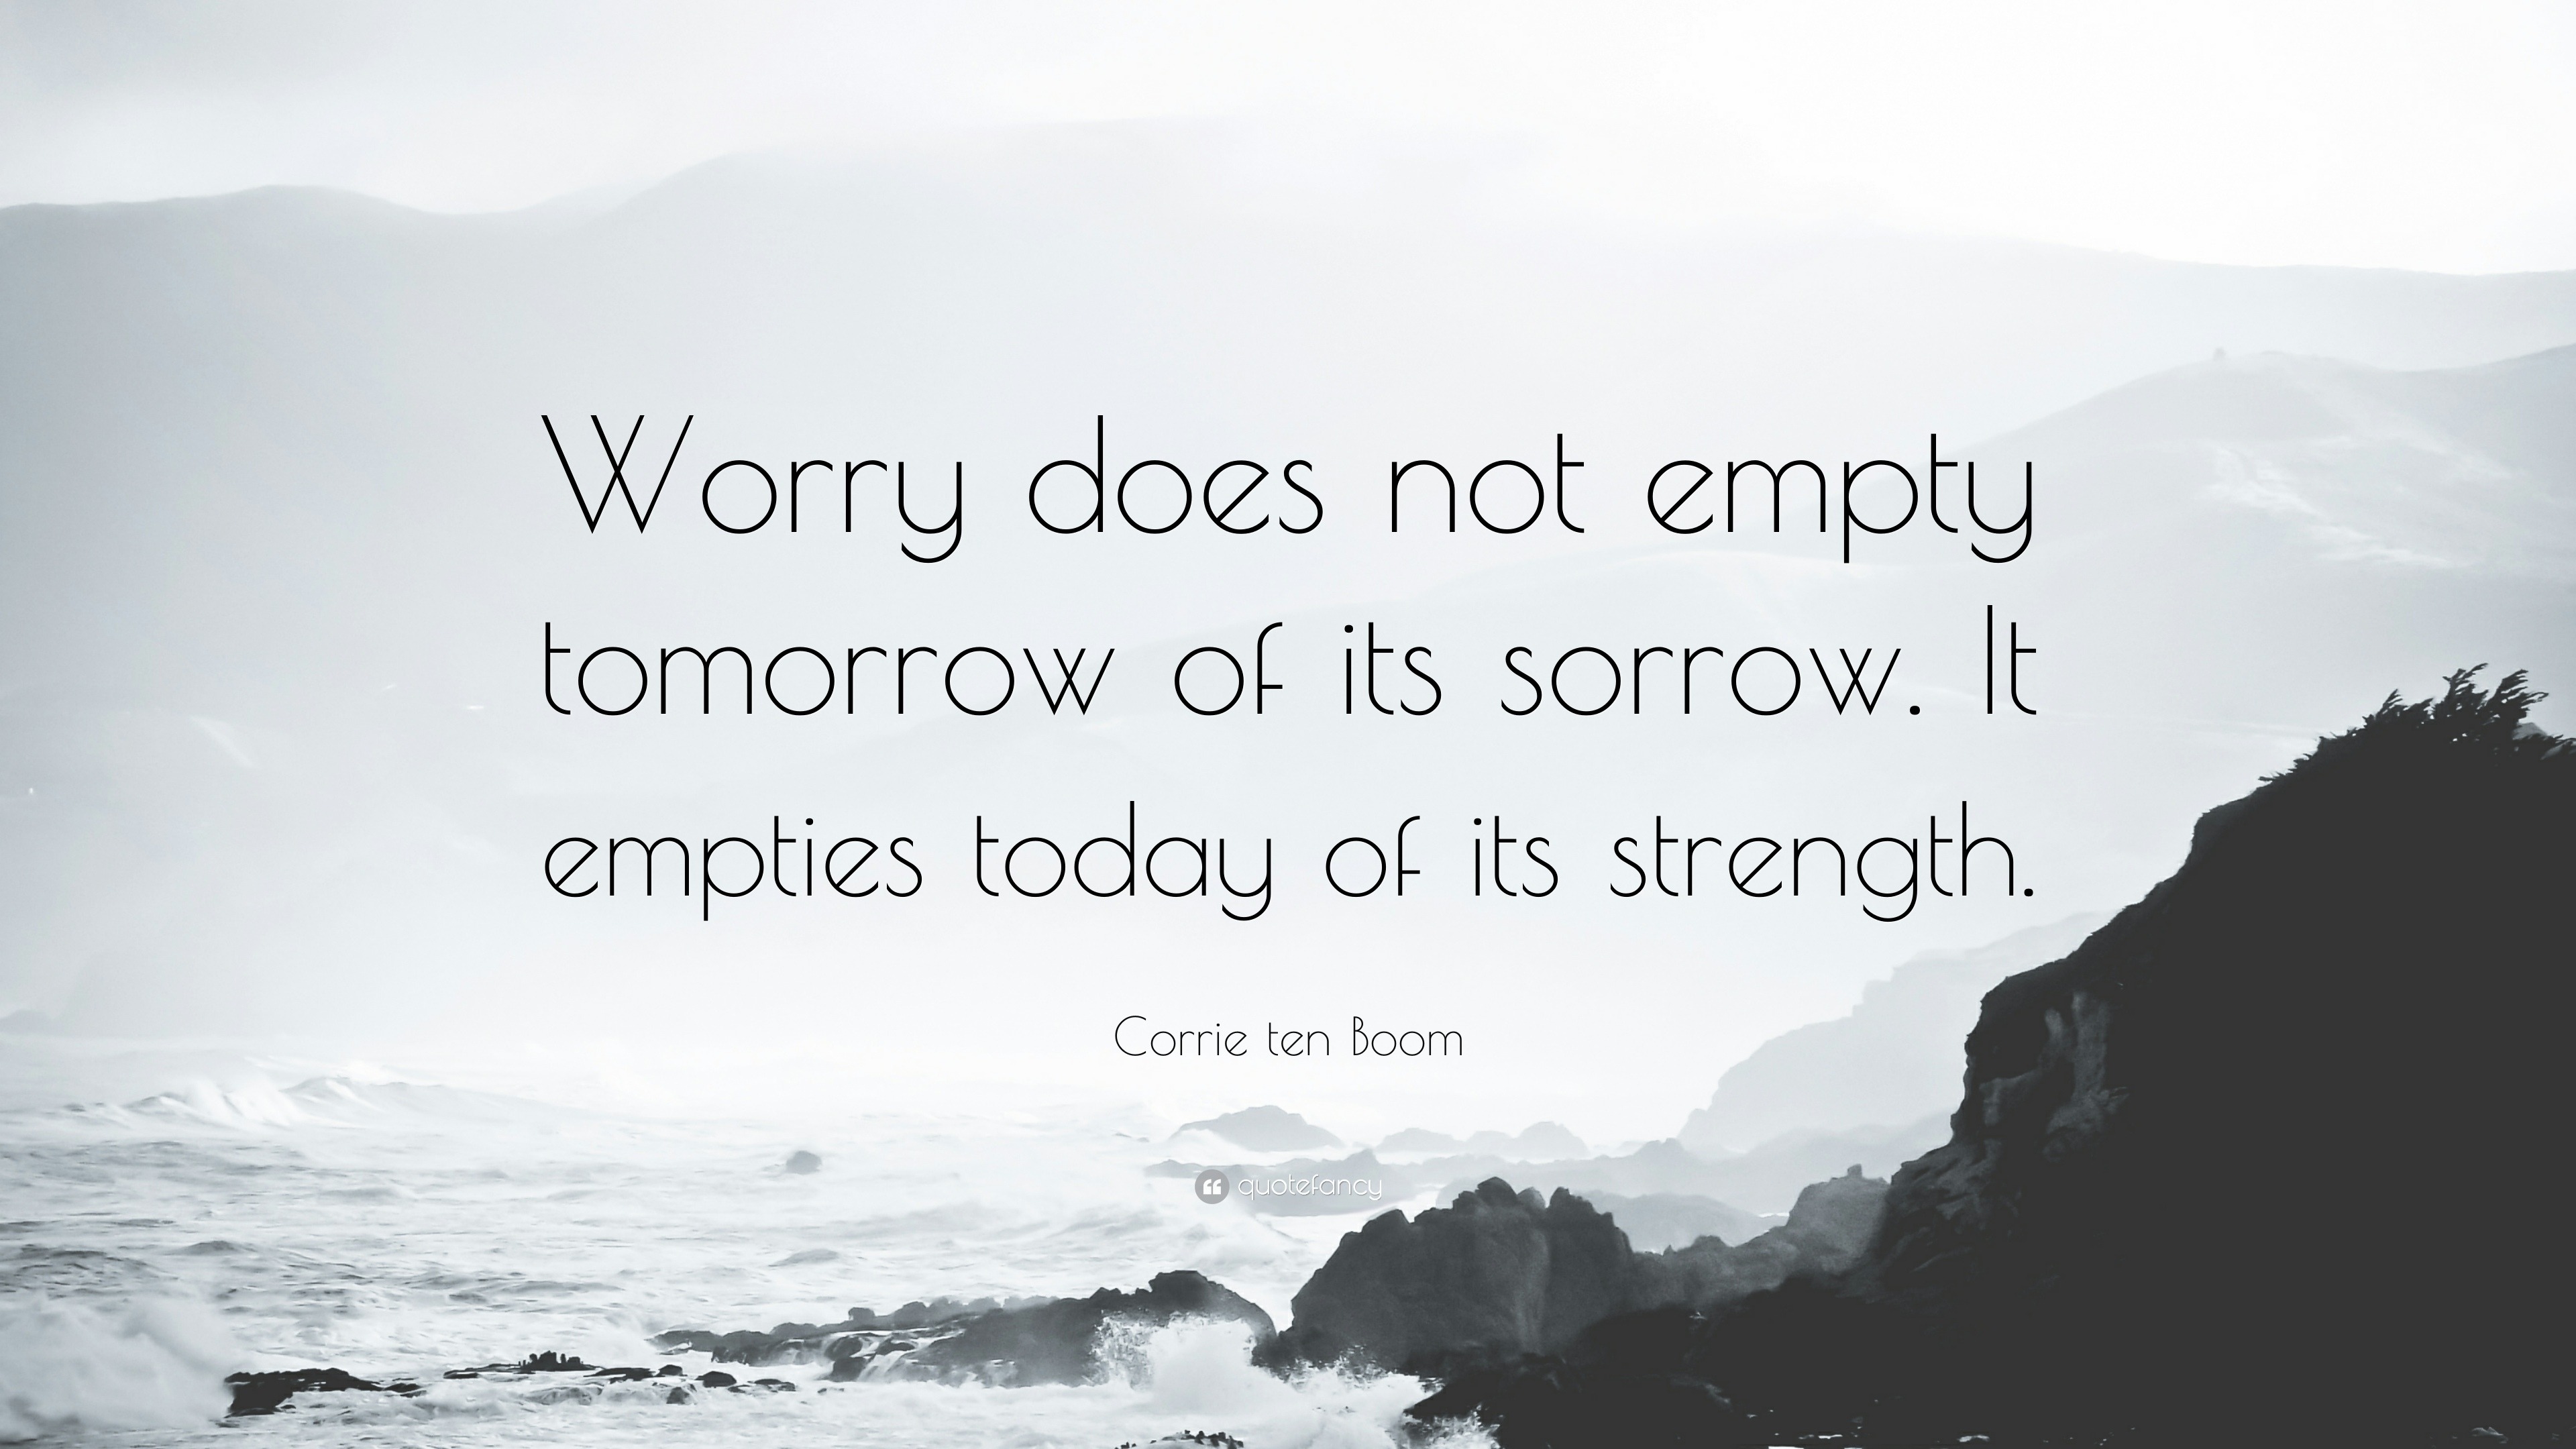 Corrie ten Boom Quote: “Worry does not empty tomorrow of its